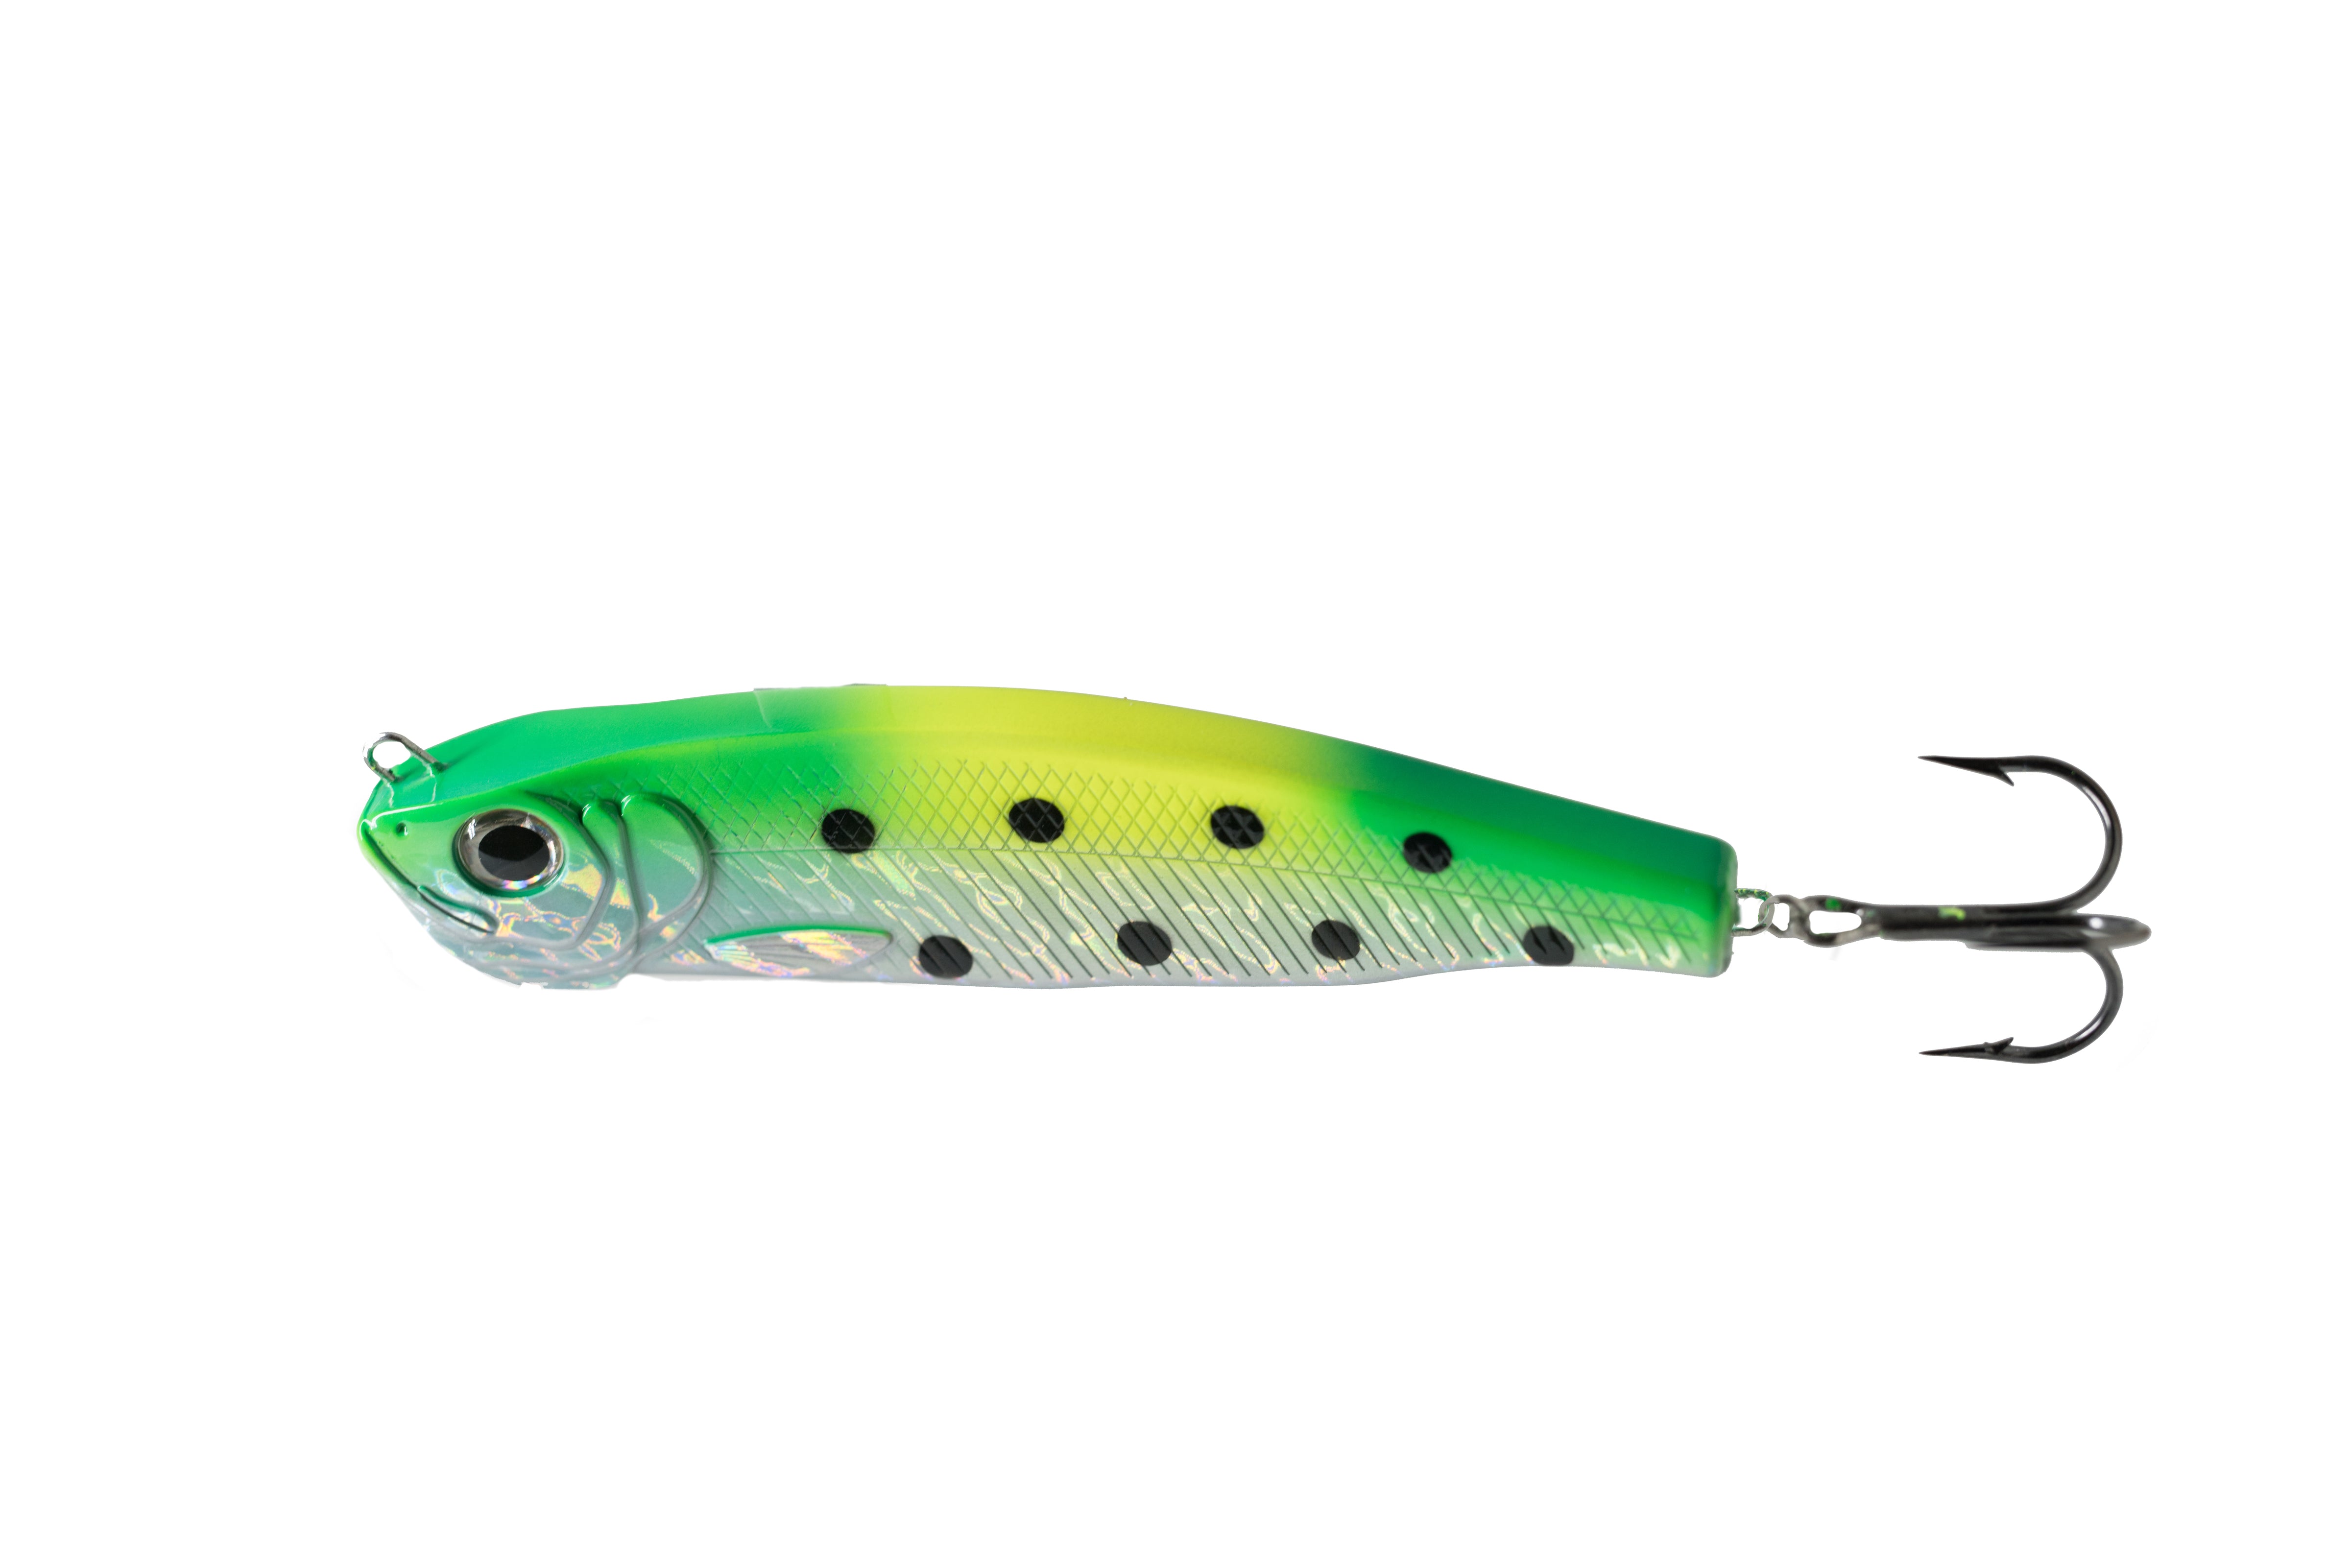 Tackle week 2019: The top 12 new lures for fishing in Canada